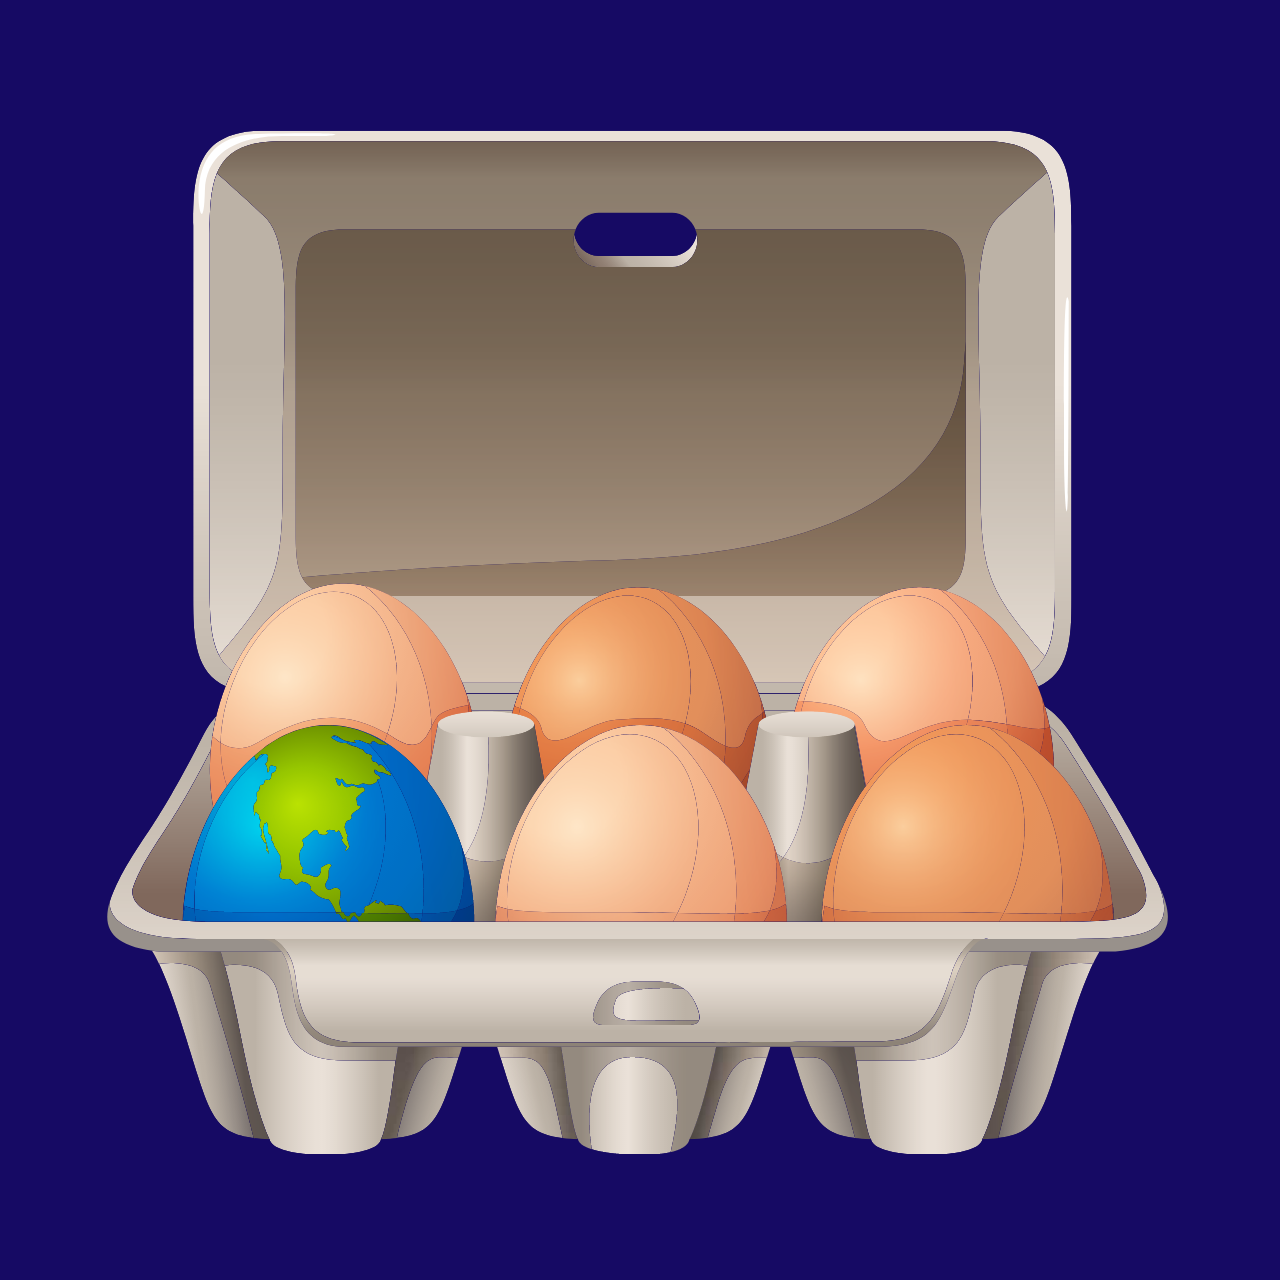 A carton of eggs in which one of the eggs is the Earth